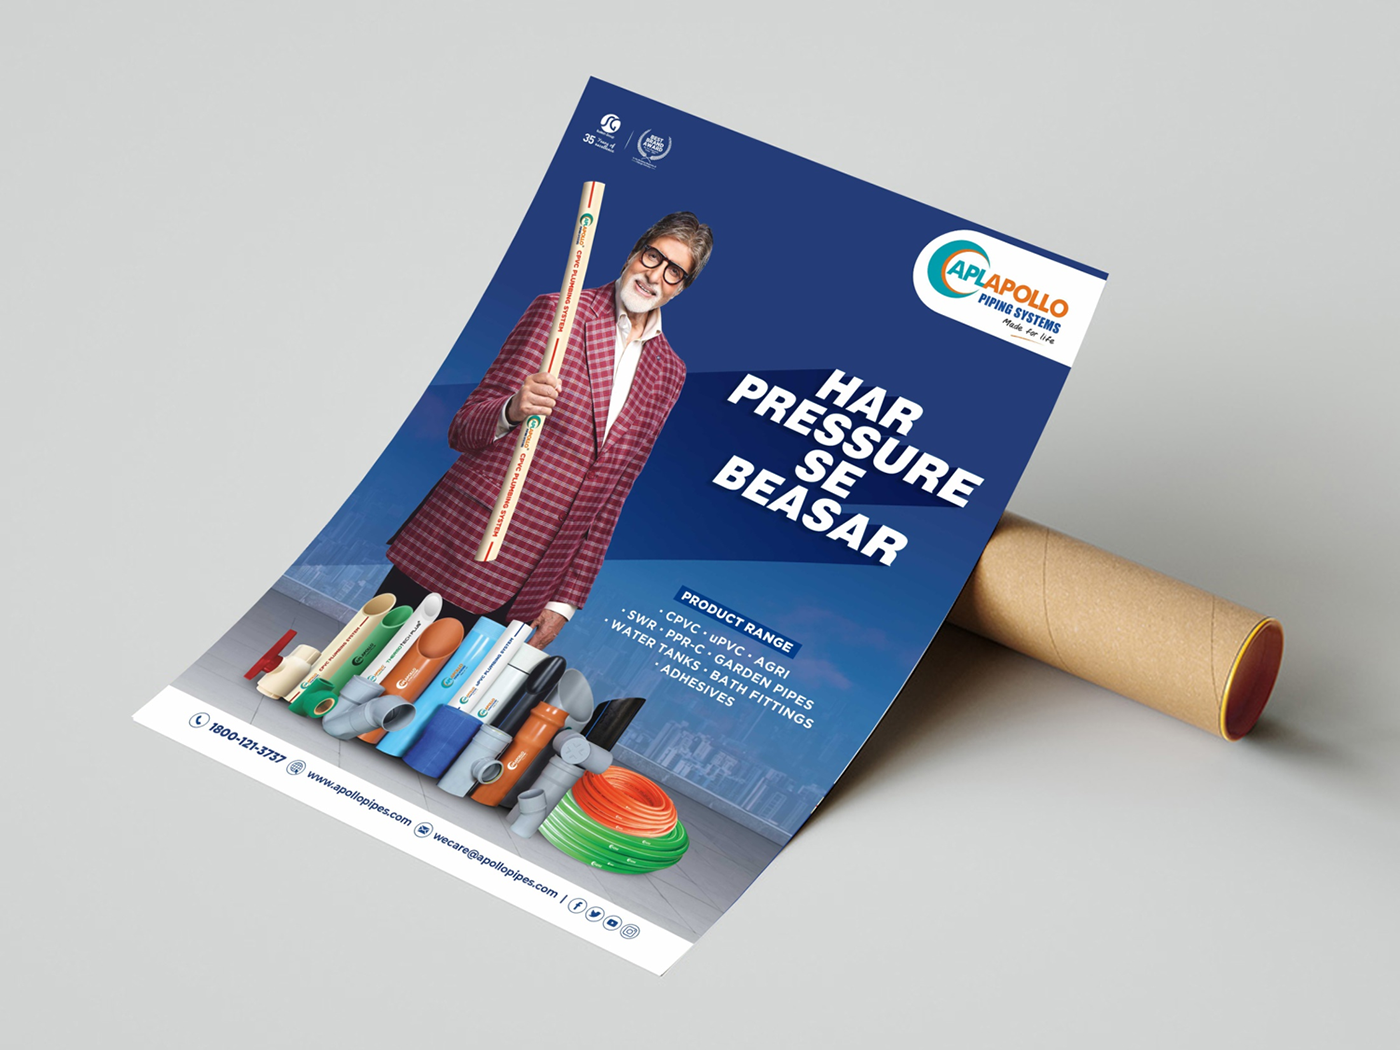 CPVC pvc pipes amitabh bachchan Poster Design Creative Design product poster Product banner